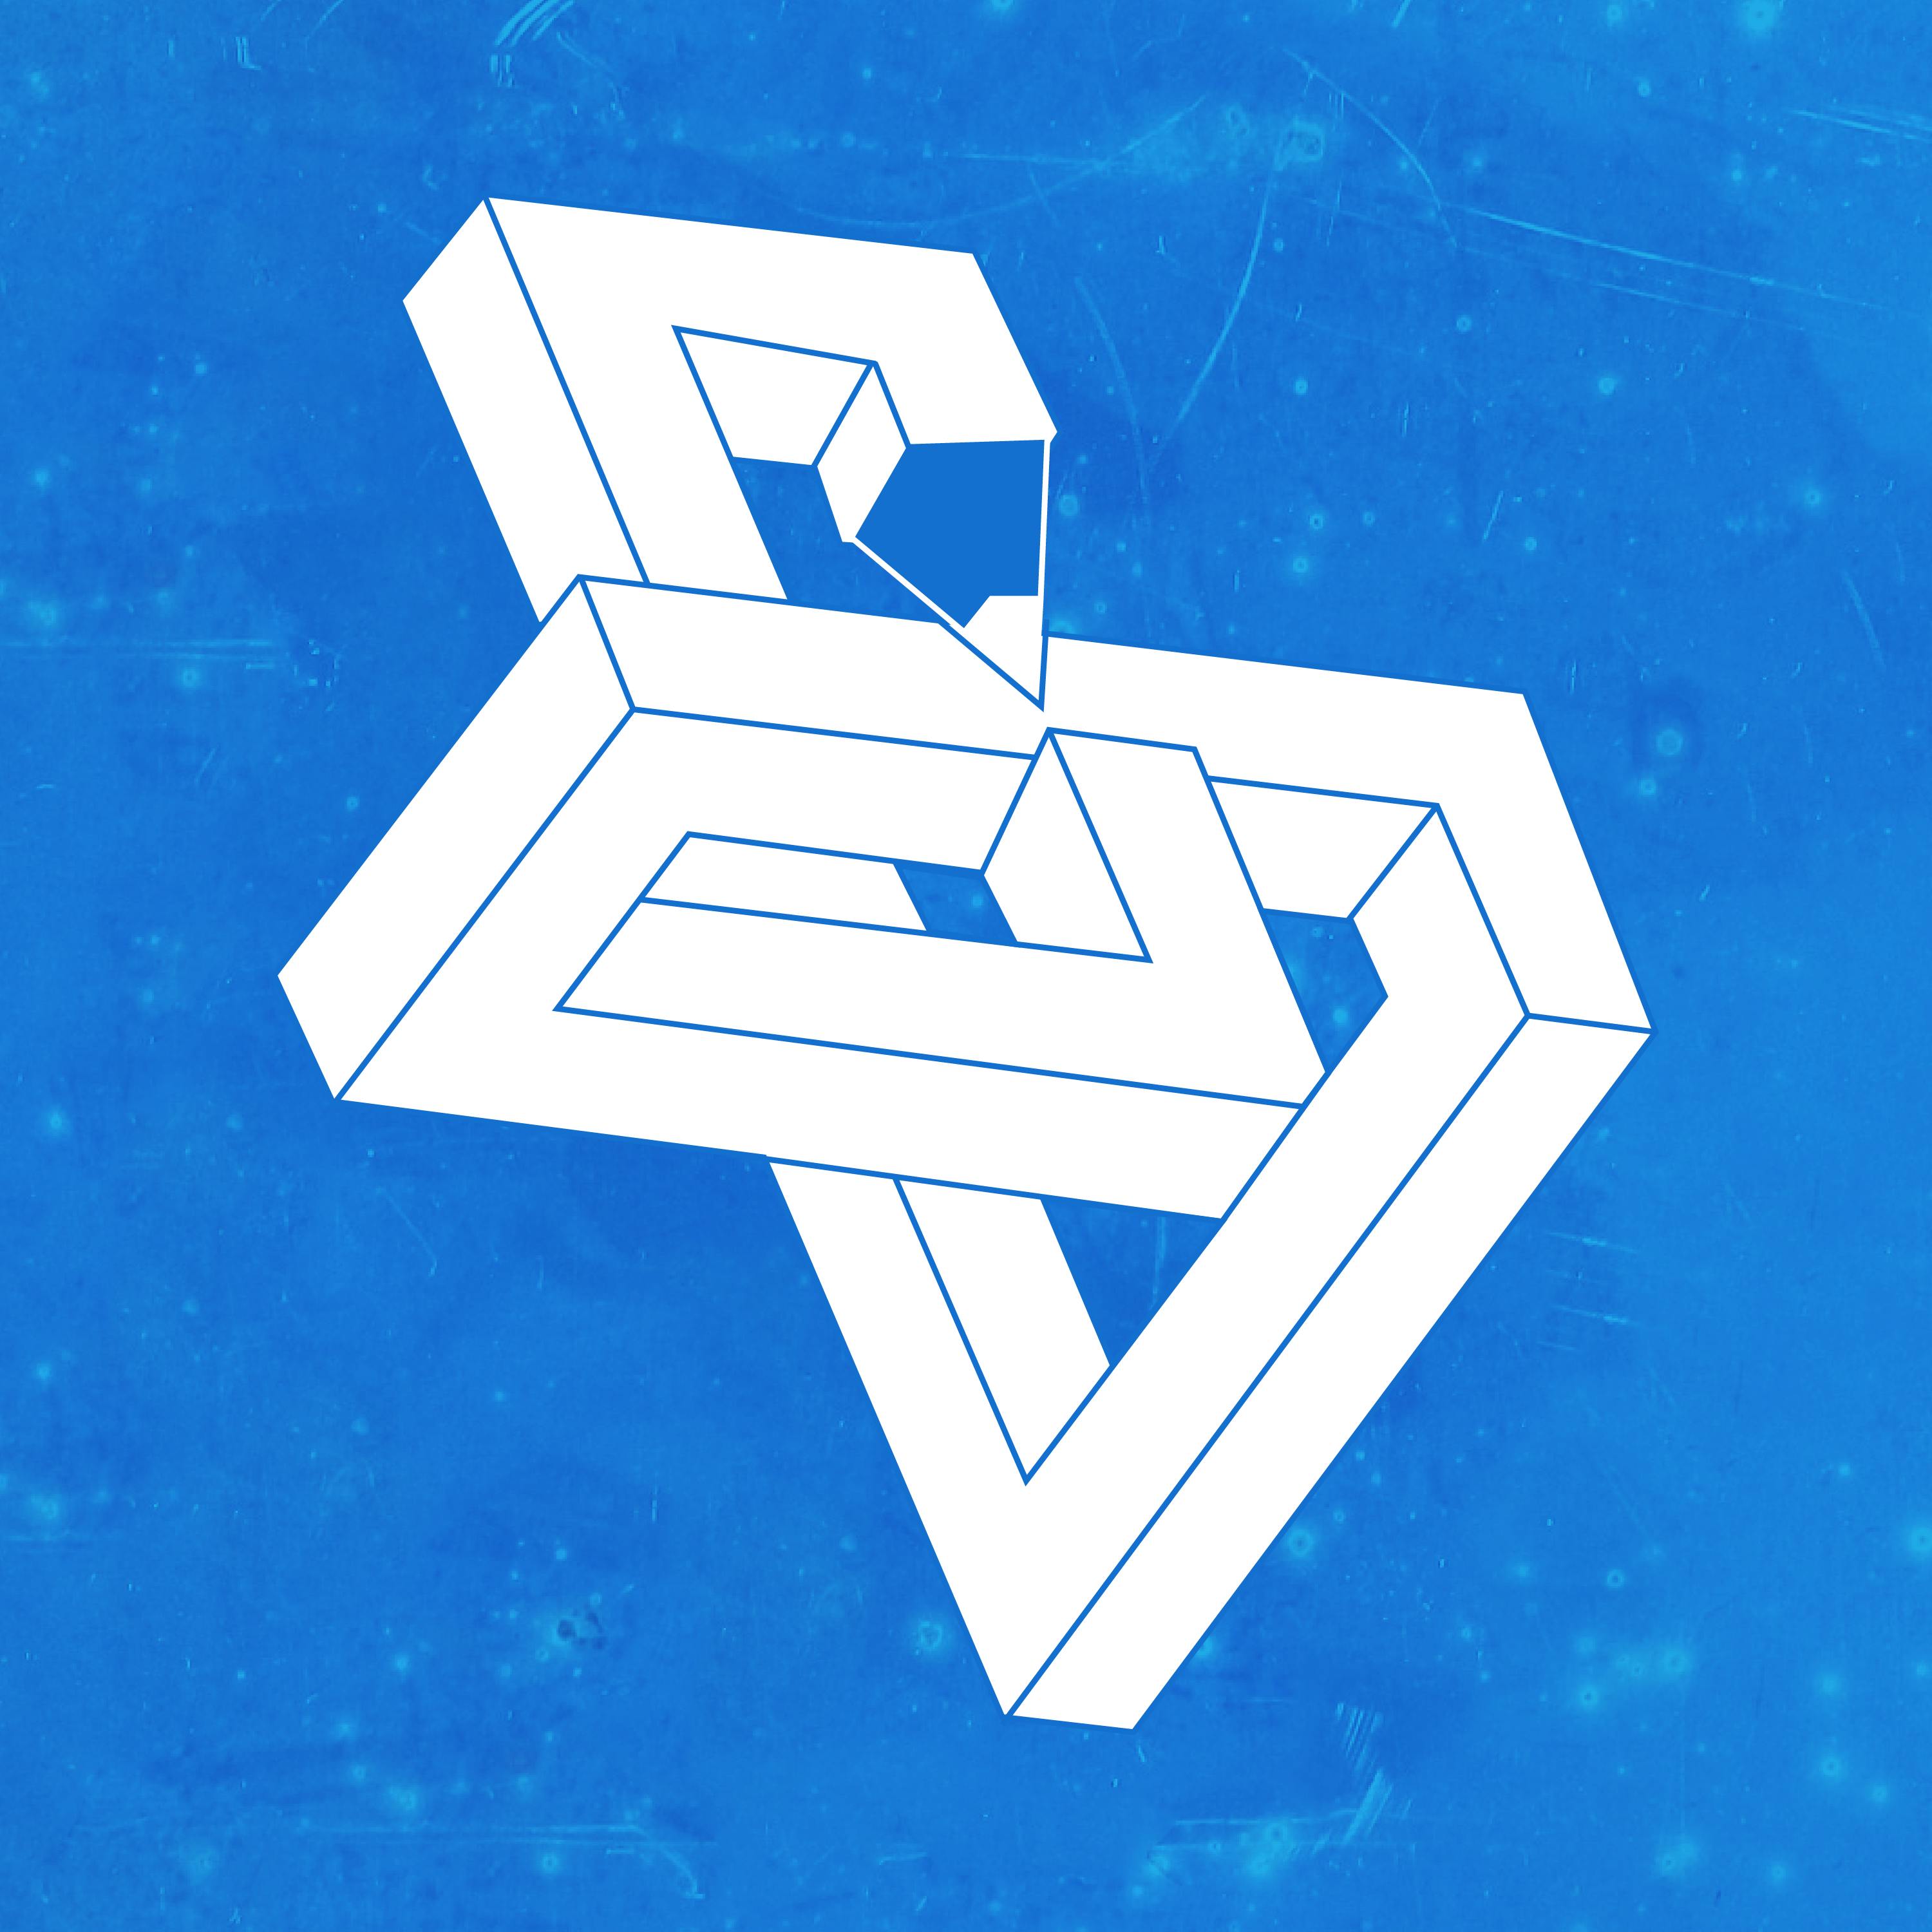 An "impossible geometry" version of Quickdraw's pencil logo, on a blue background